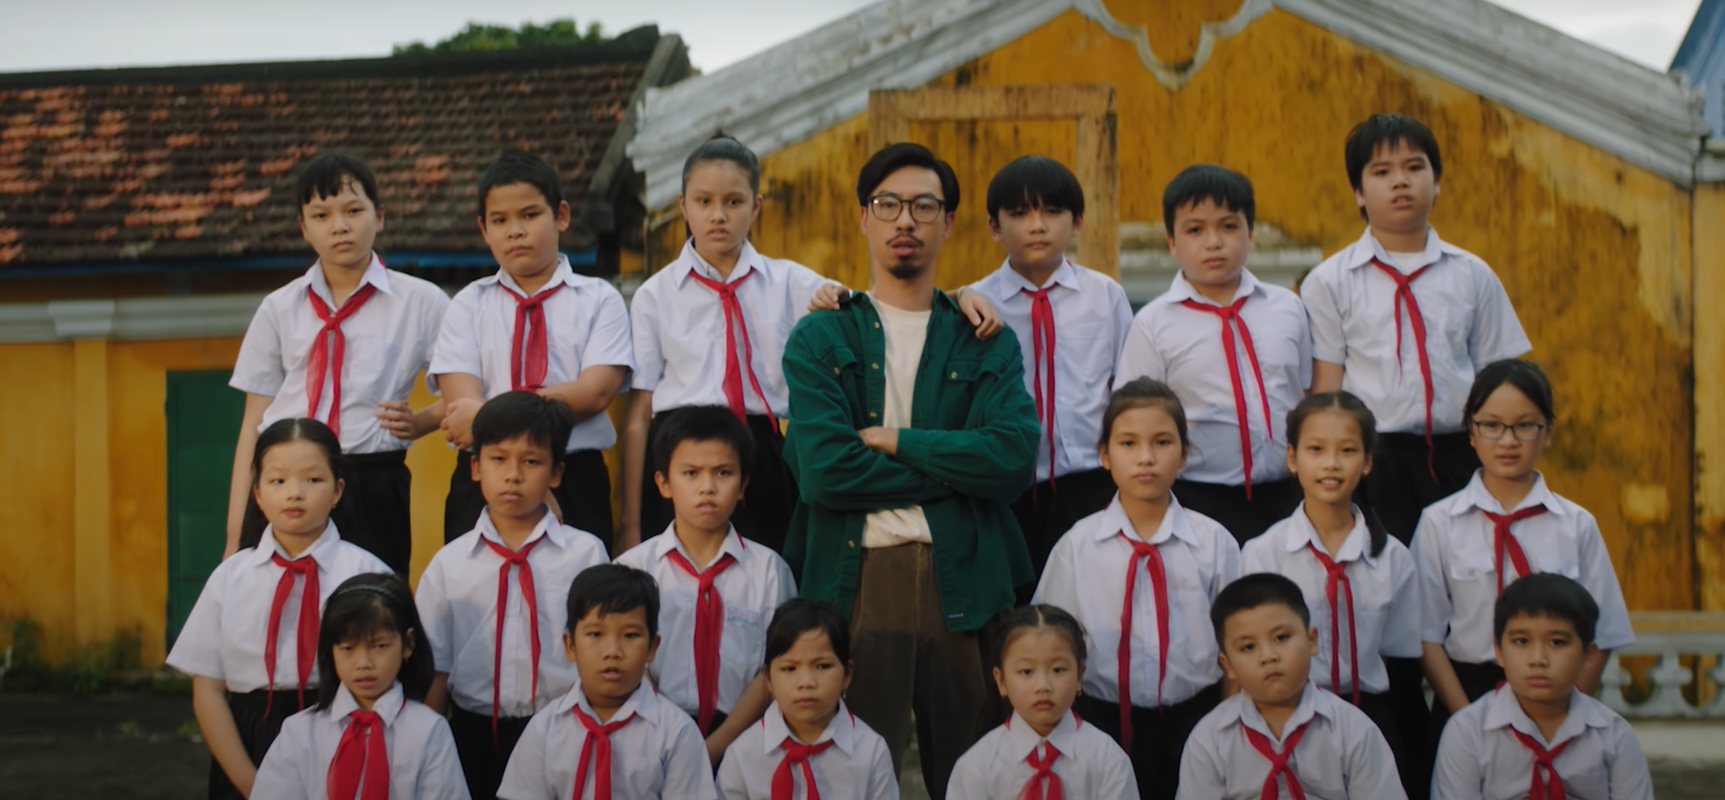 Den Vau and students in Tam Thanh Bich Hoa village